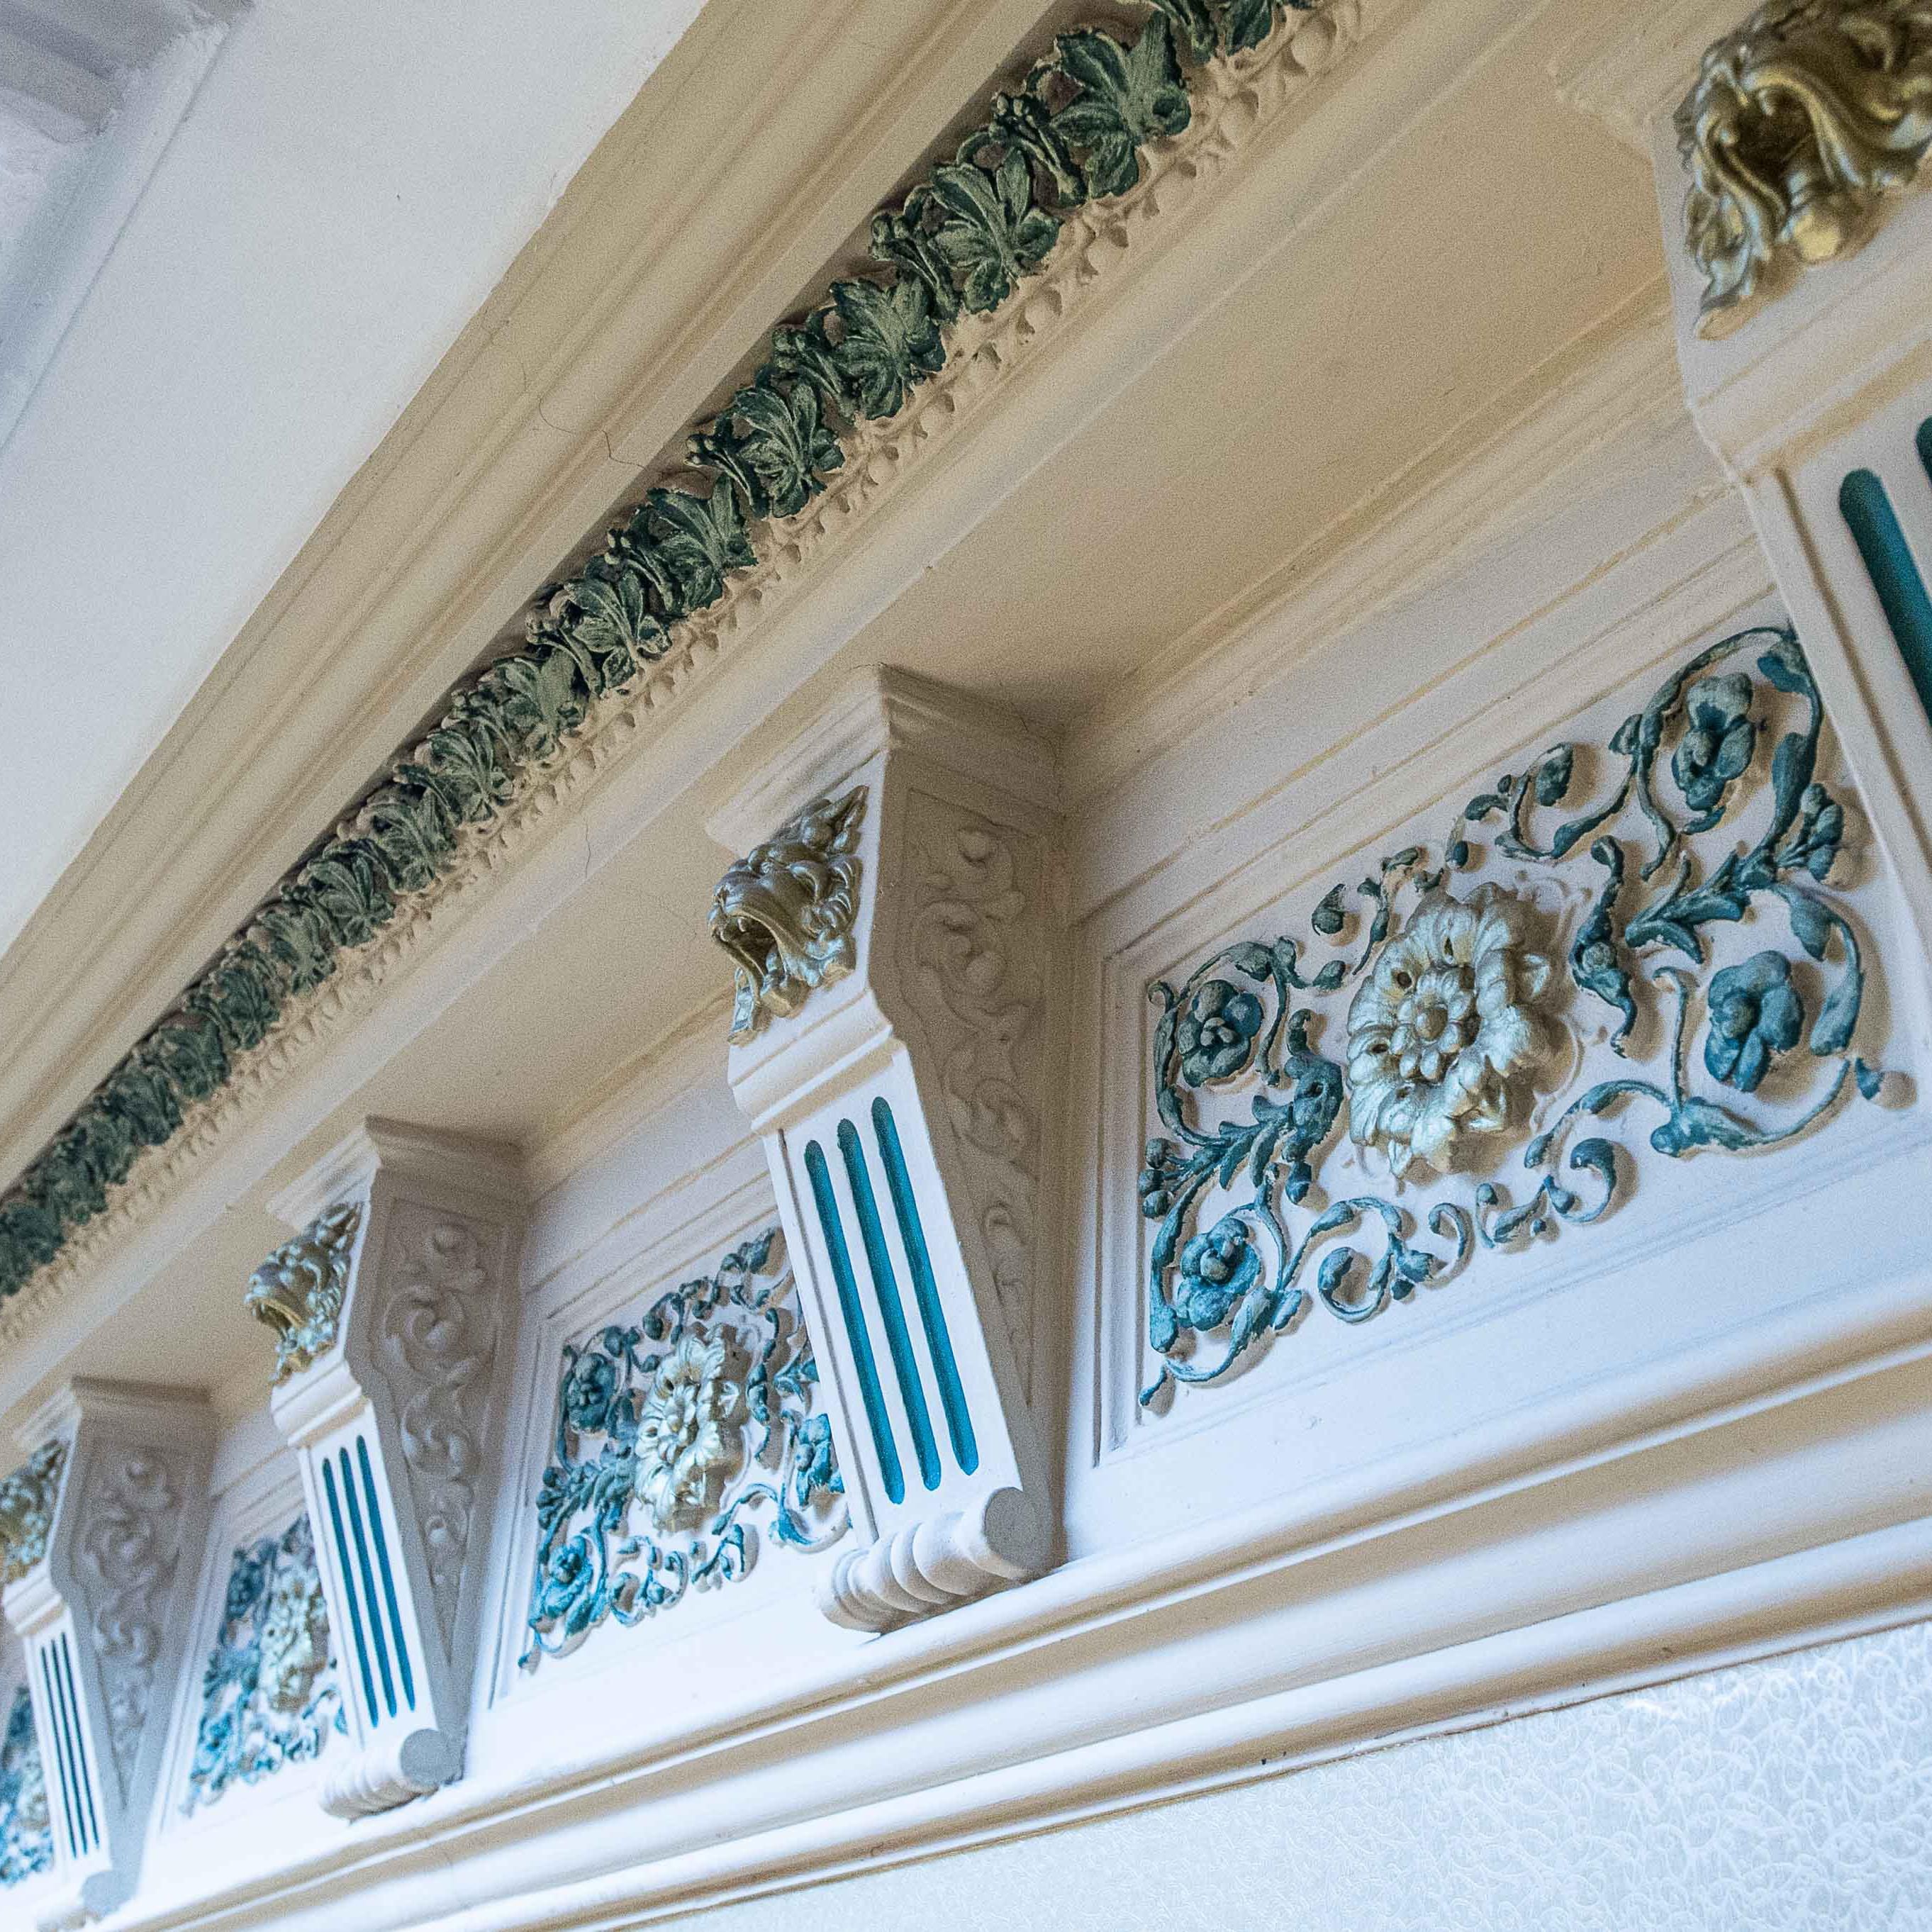 Ornate cornices add a charm &amp; elegance to the building